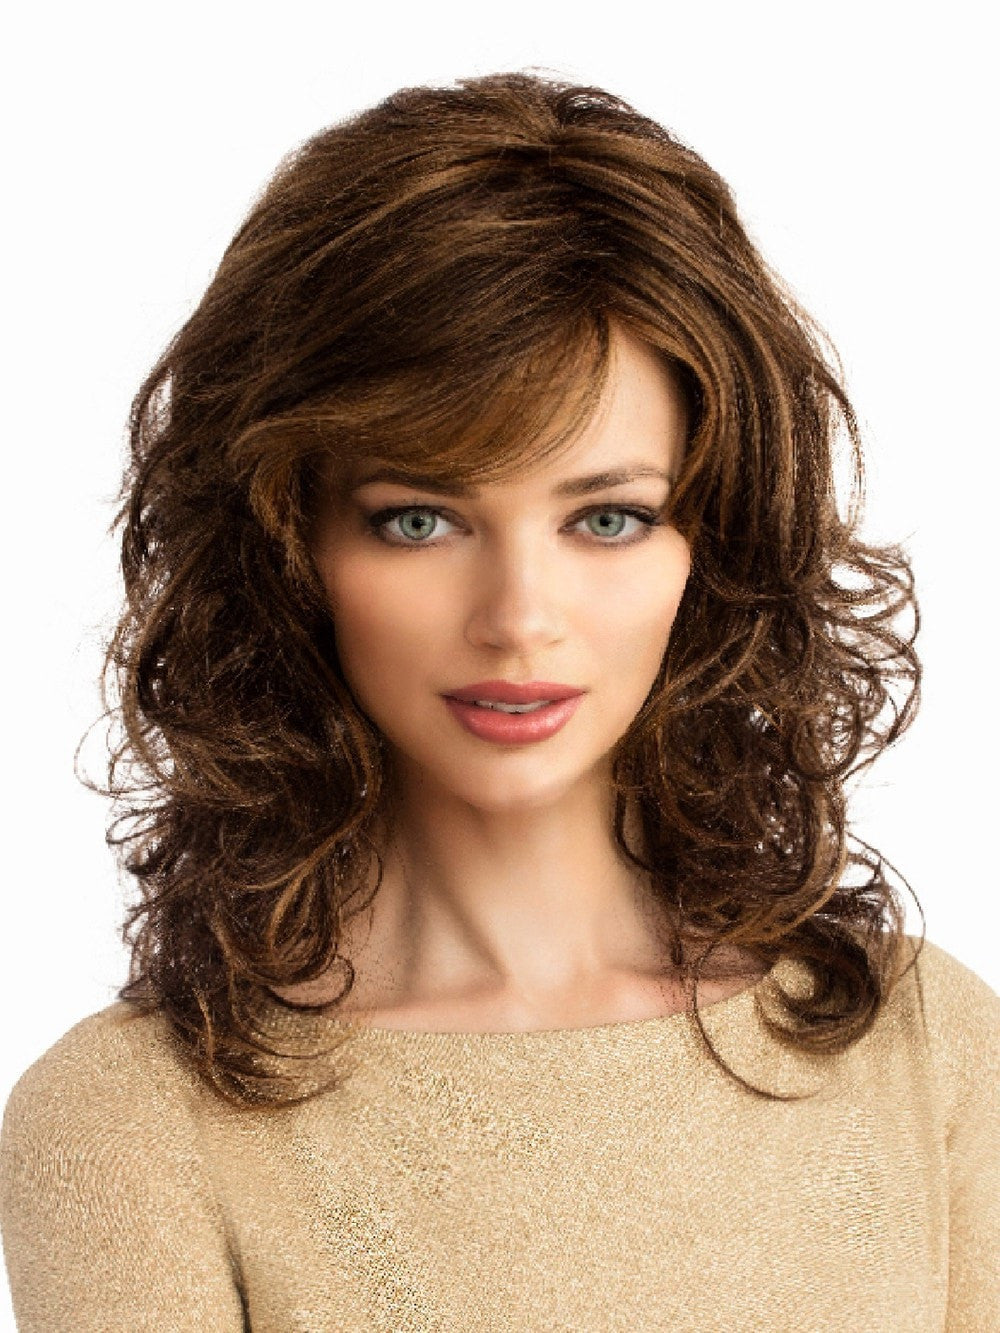 A Belle lace front wig Charlotte